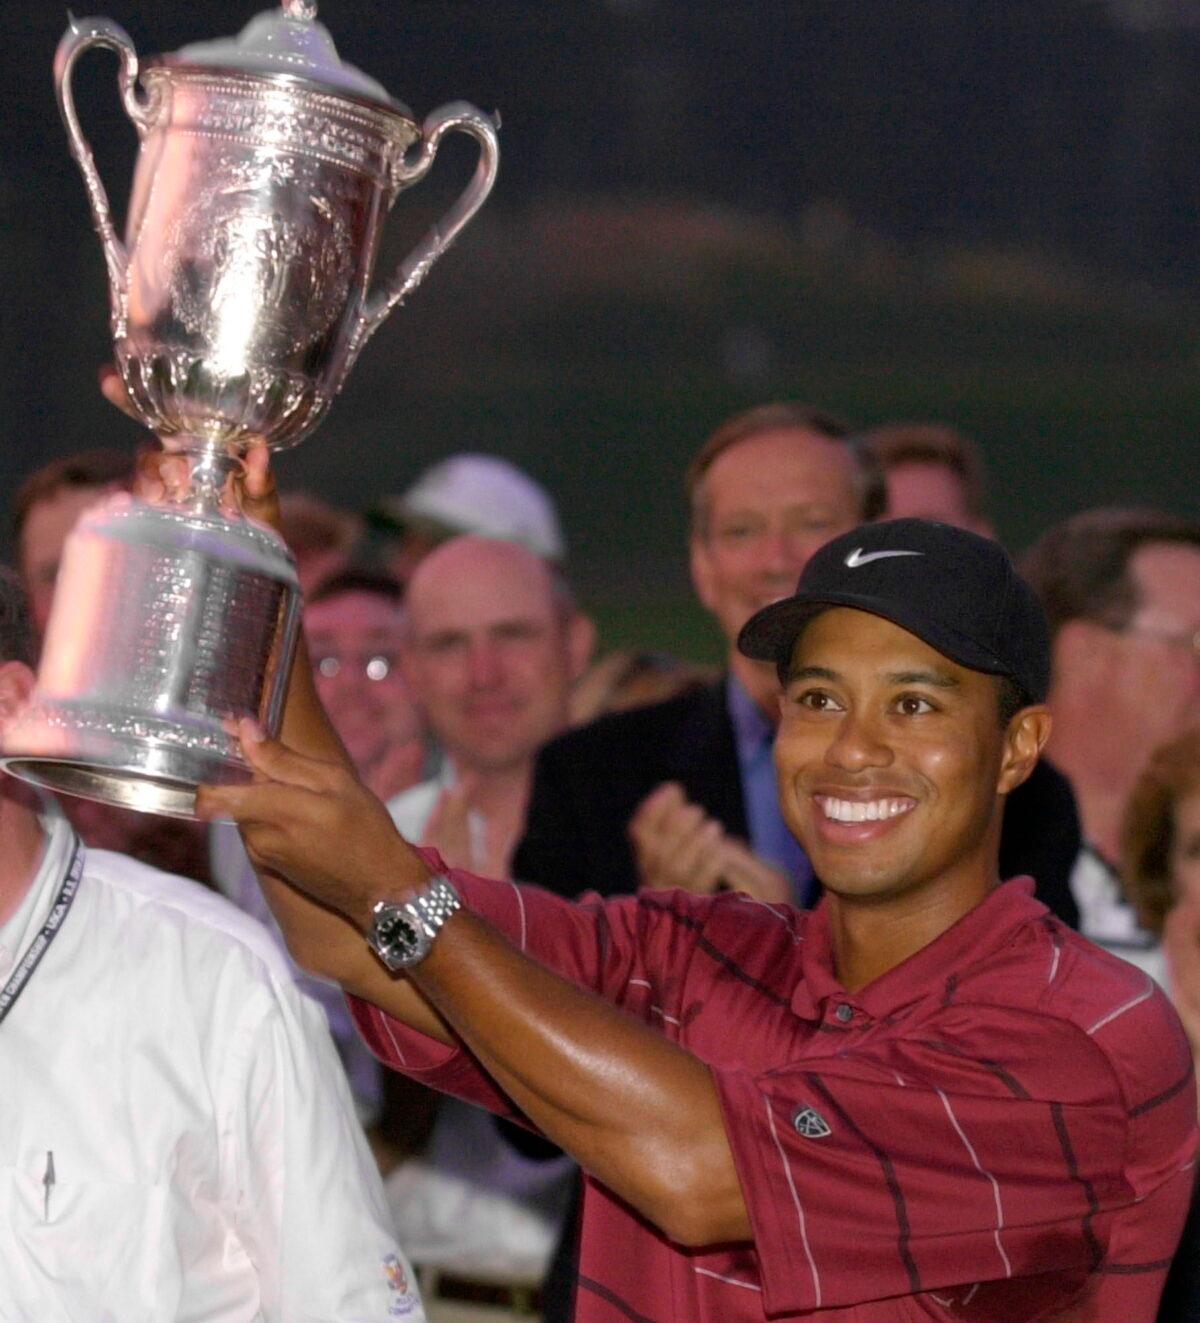 Tiger Woods holds the 2002 U.S. Open golf tournament trophy after winning at the Black Course of Bethpage State Park in Farmingdale, New York. (Charles Krupa/ AP Photo)